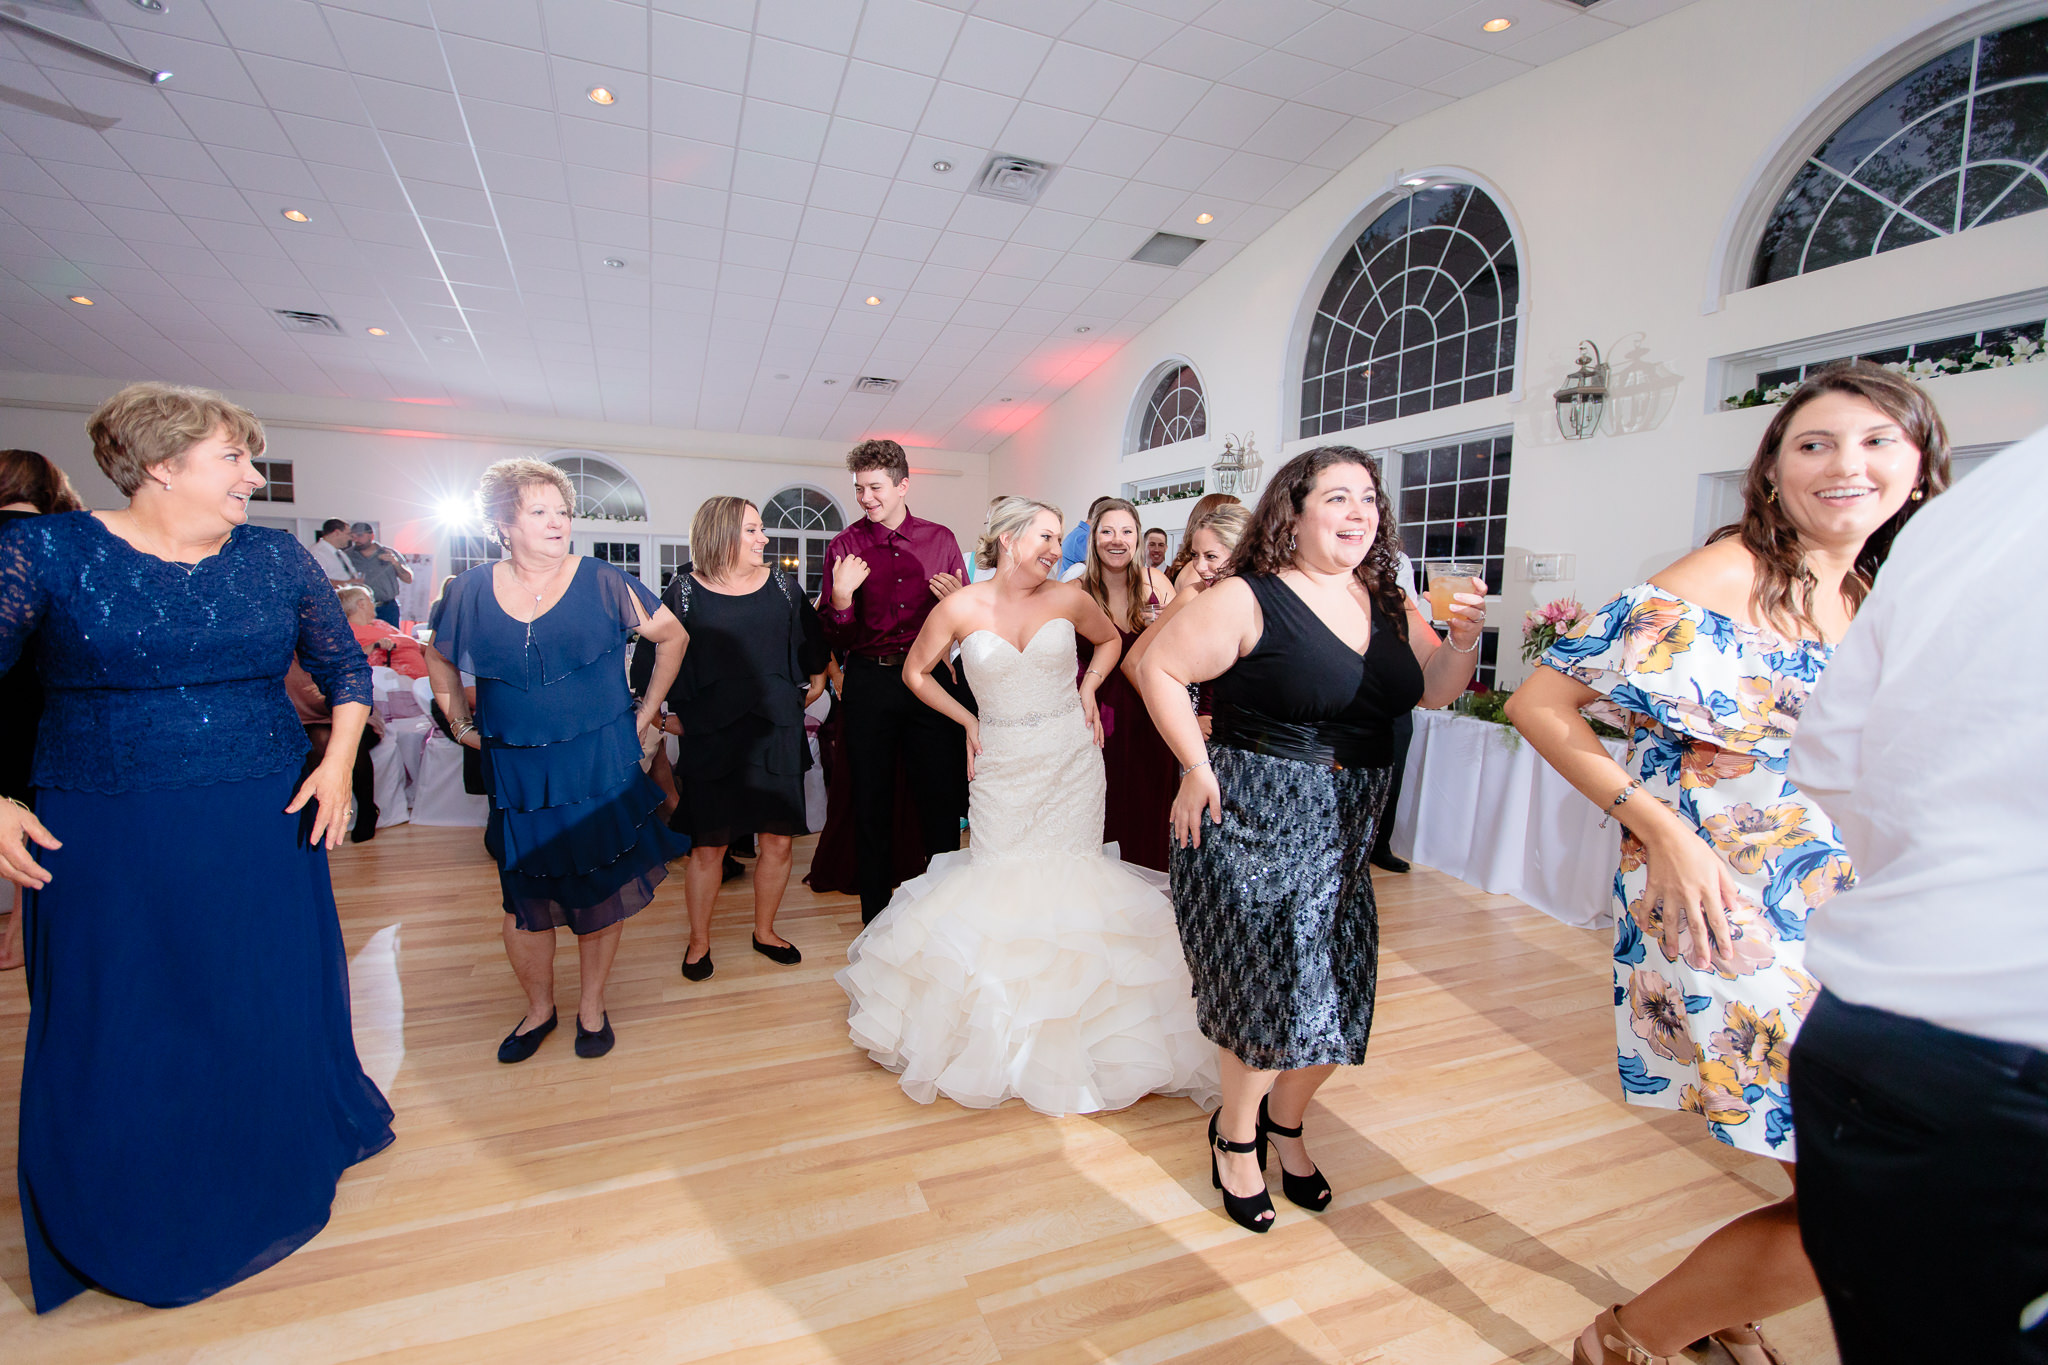 Guests do a line dance at a Greystone Fields wedding